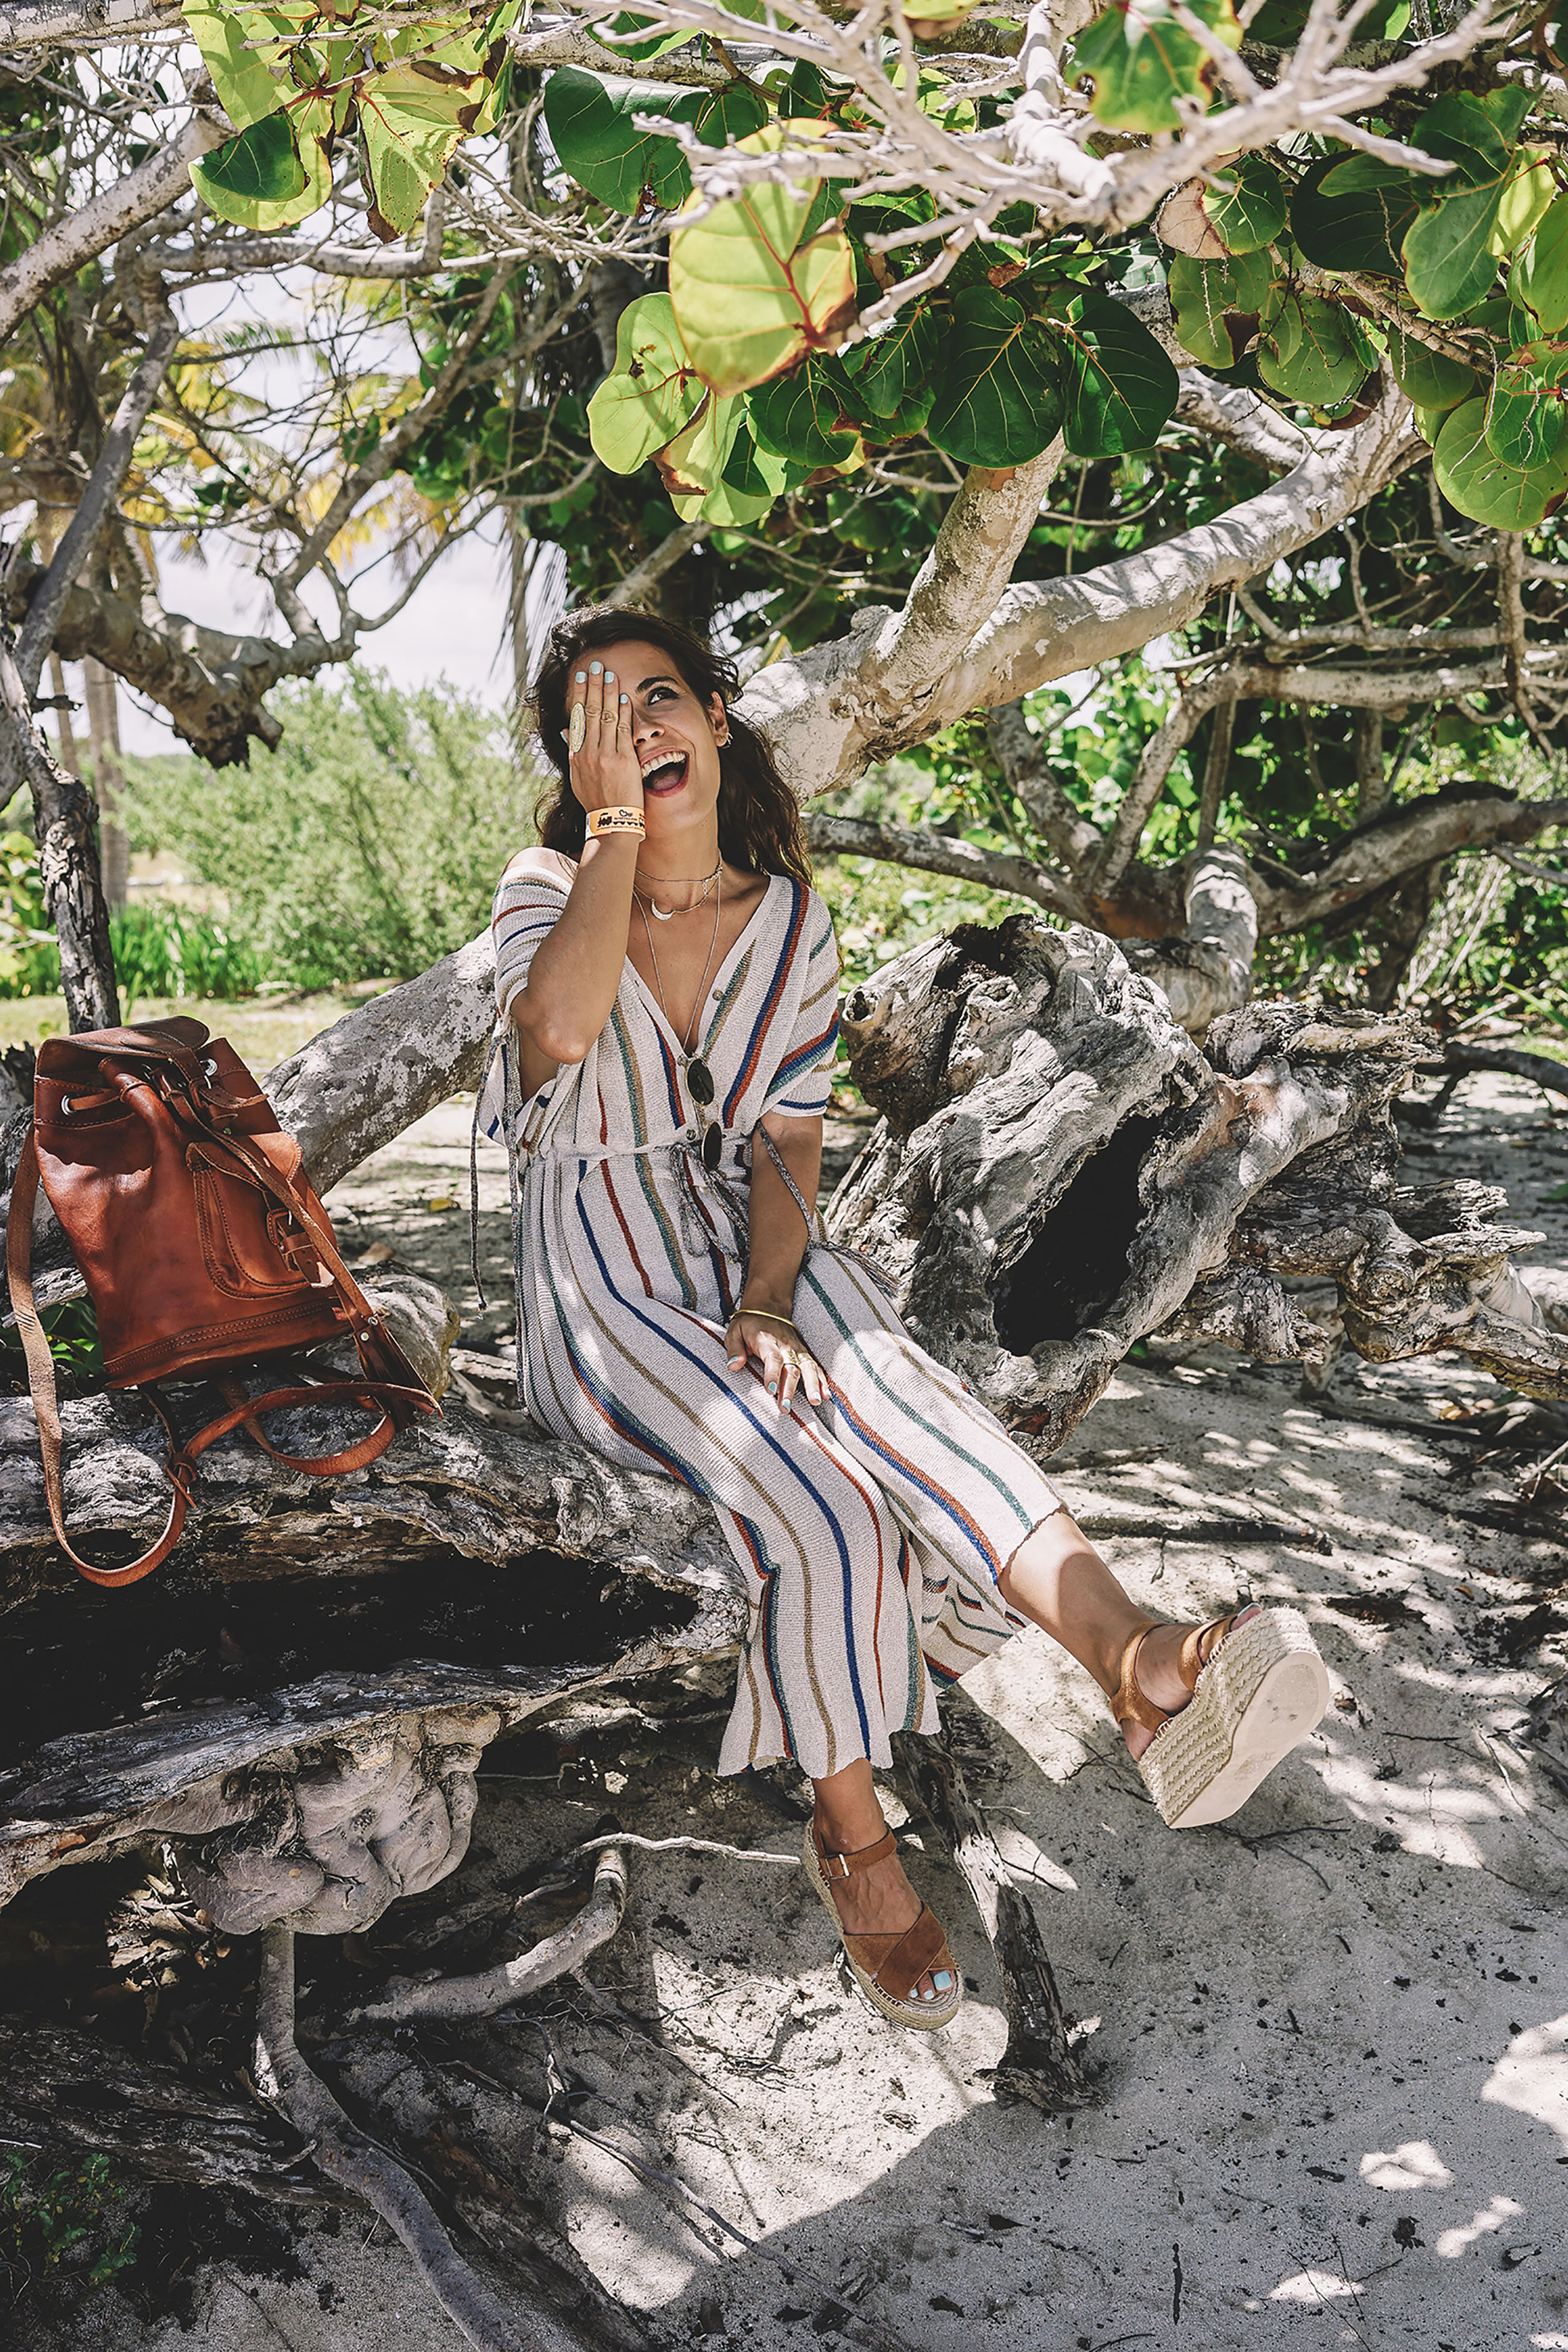 stripped_dress-leather_backpack-suede_espadrilles-mayan_ruins-hotel_esencia-sanara_tulum-beach-mexico-outfit-collage_vintage-57